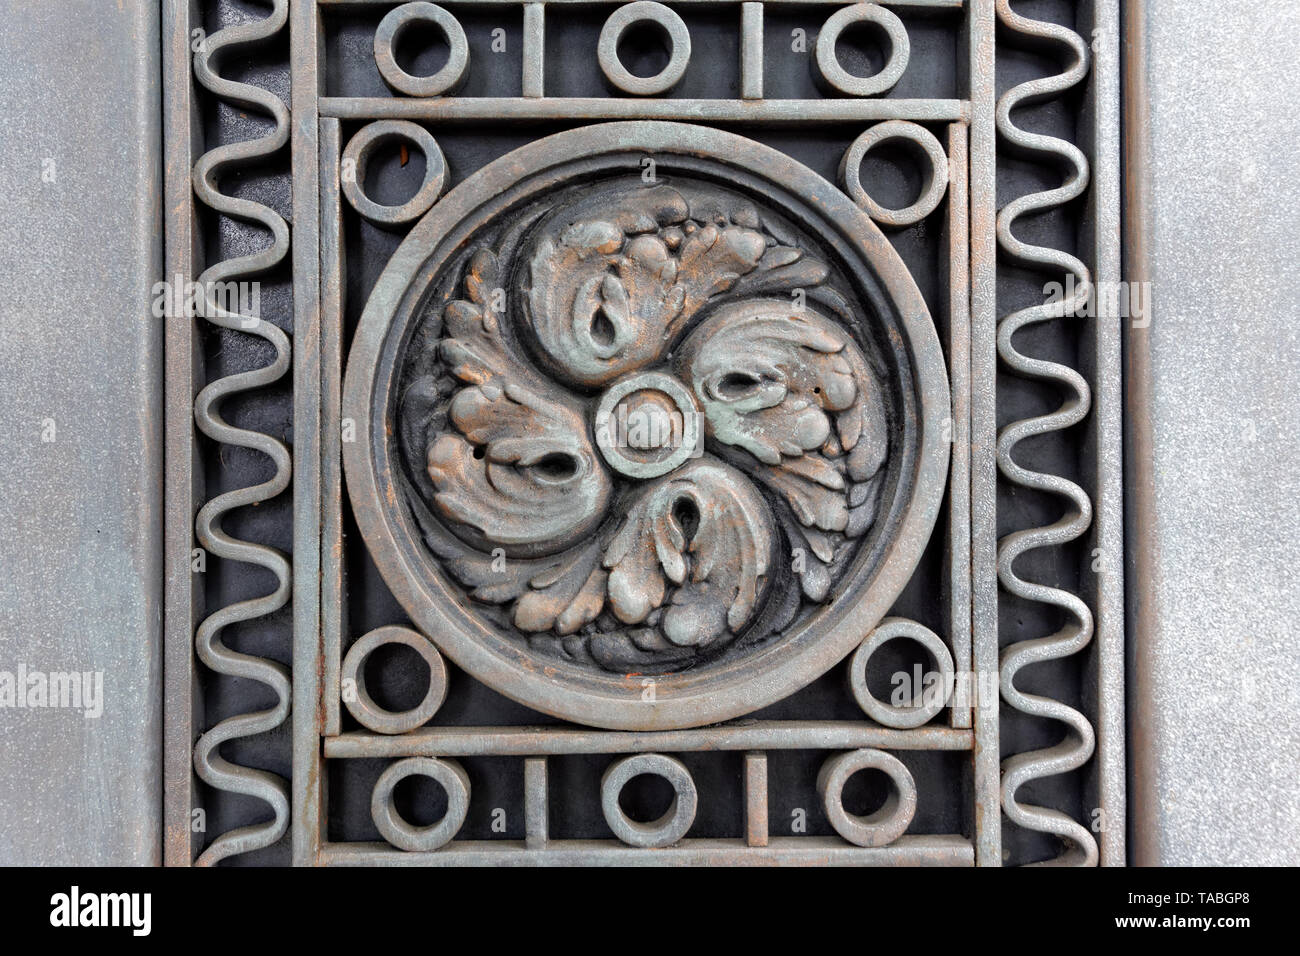 Detail of an ornate decorative copper grate Stock Photo